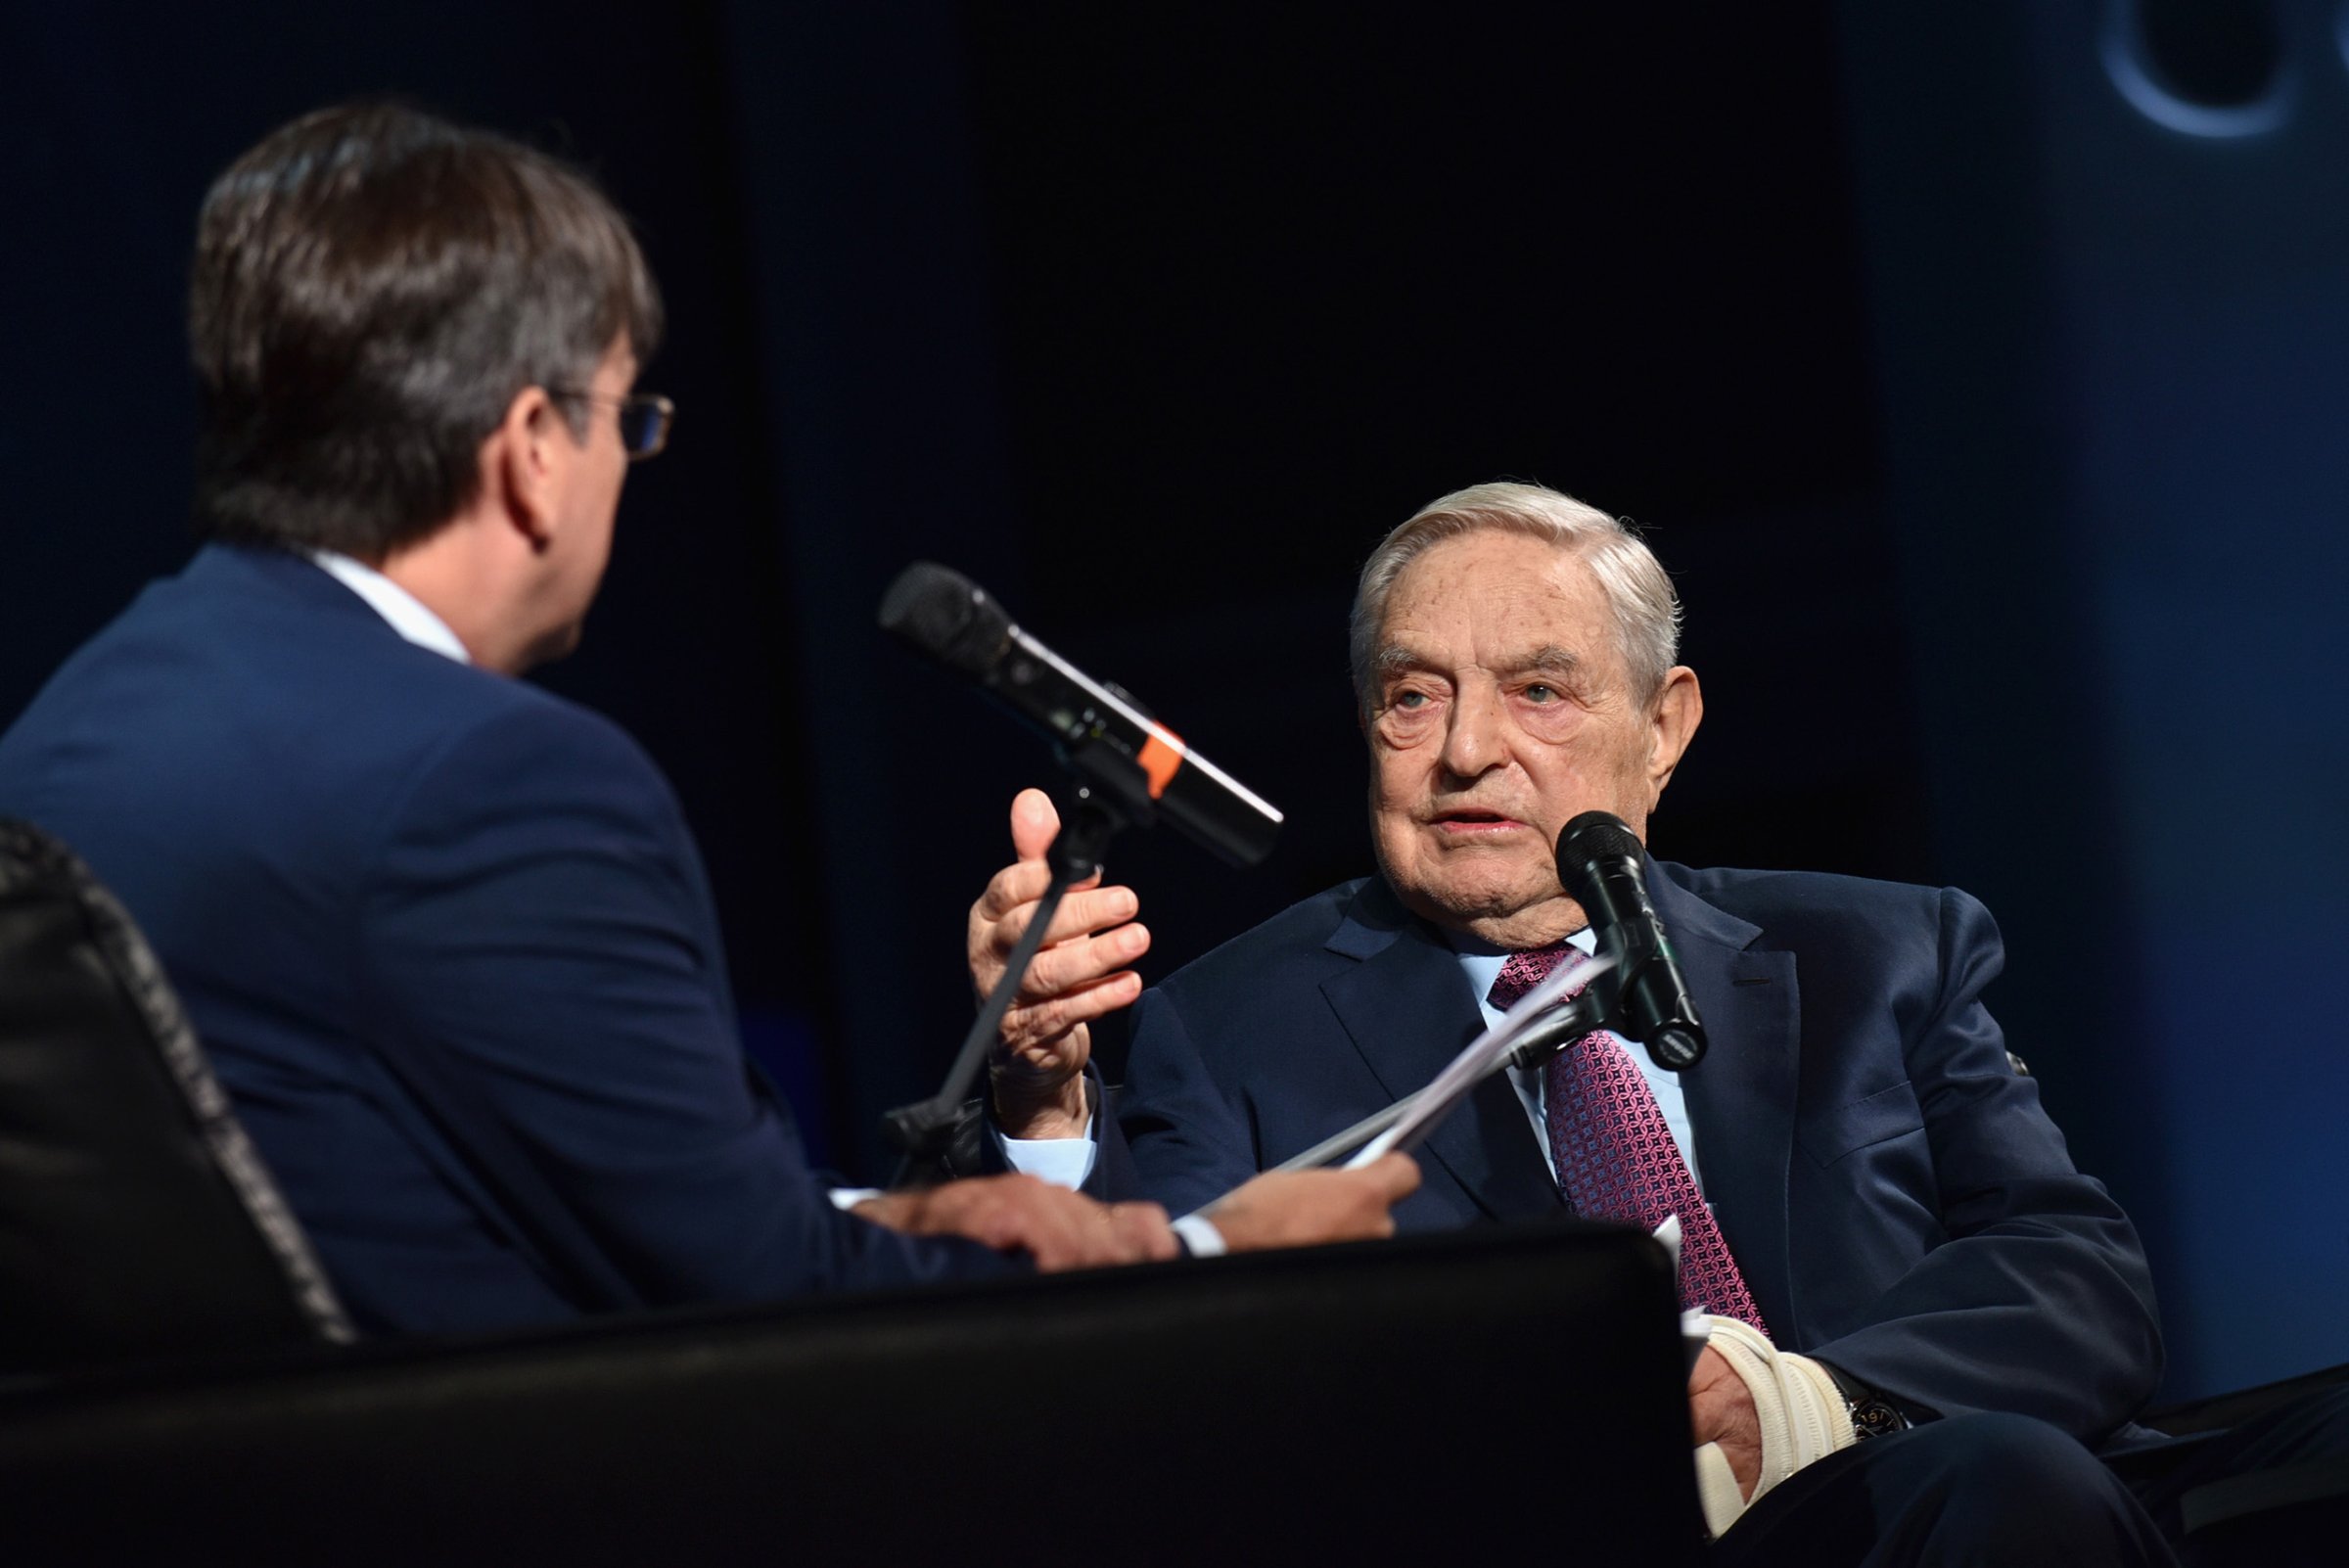 Founder and Chair, Soros Fund Management and the Open Society Foundations George Soros attends 2016 Concordia Summit - Day 2 at Grand Hyatt New York on Sept. 20, 2016.